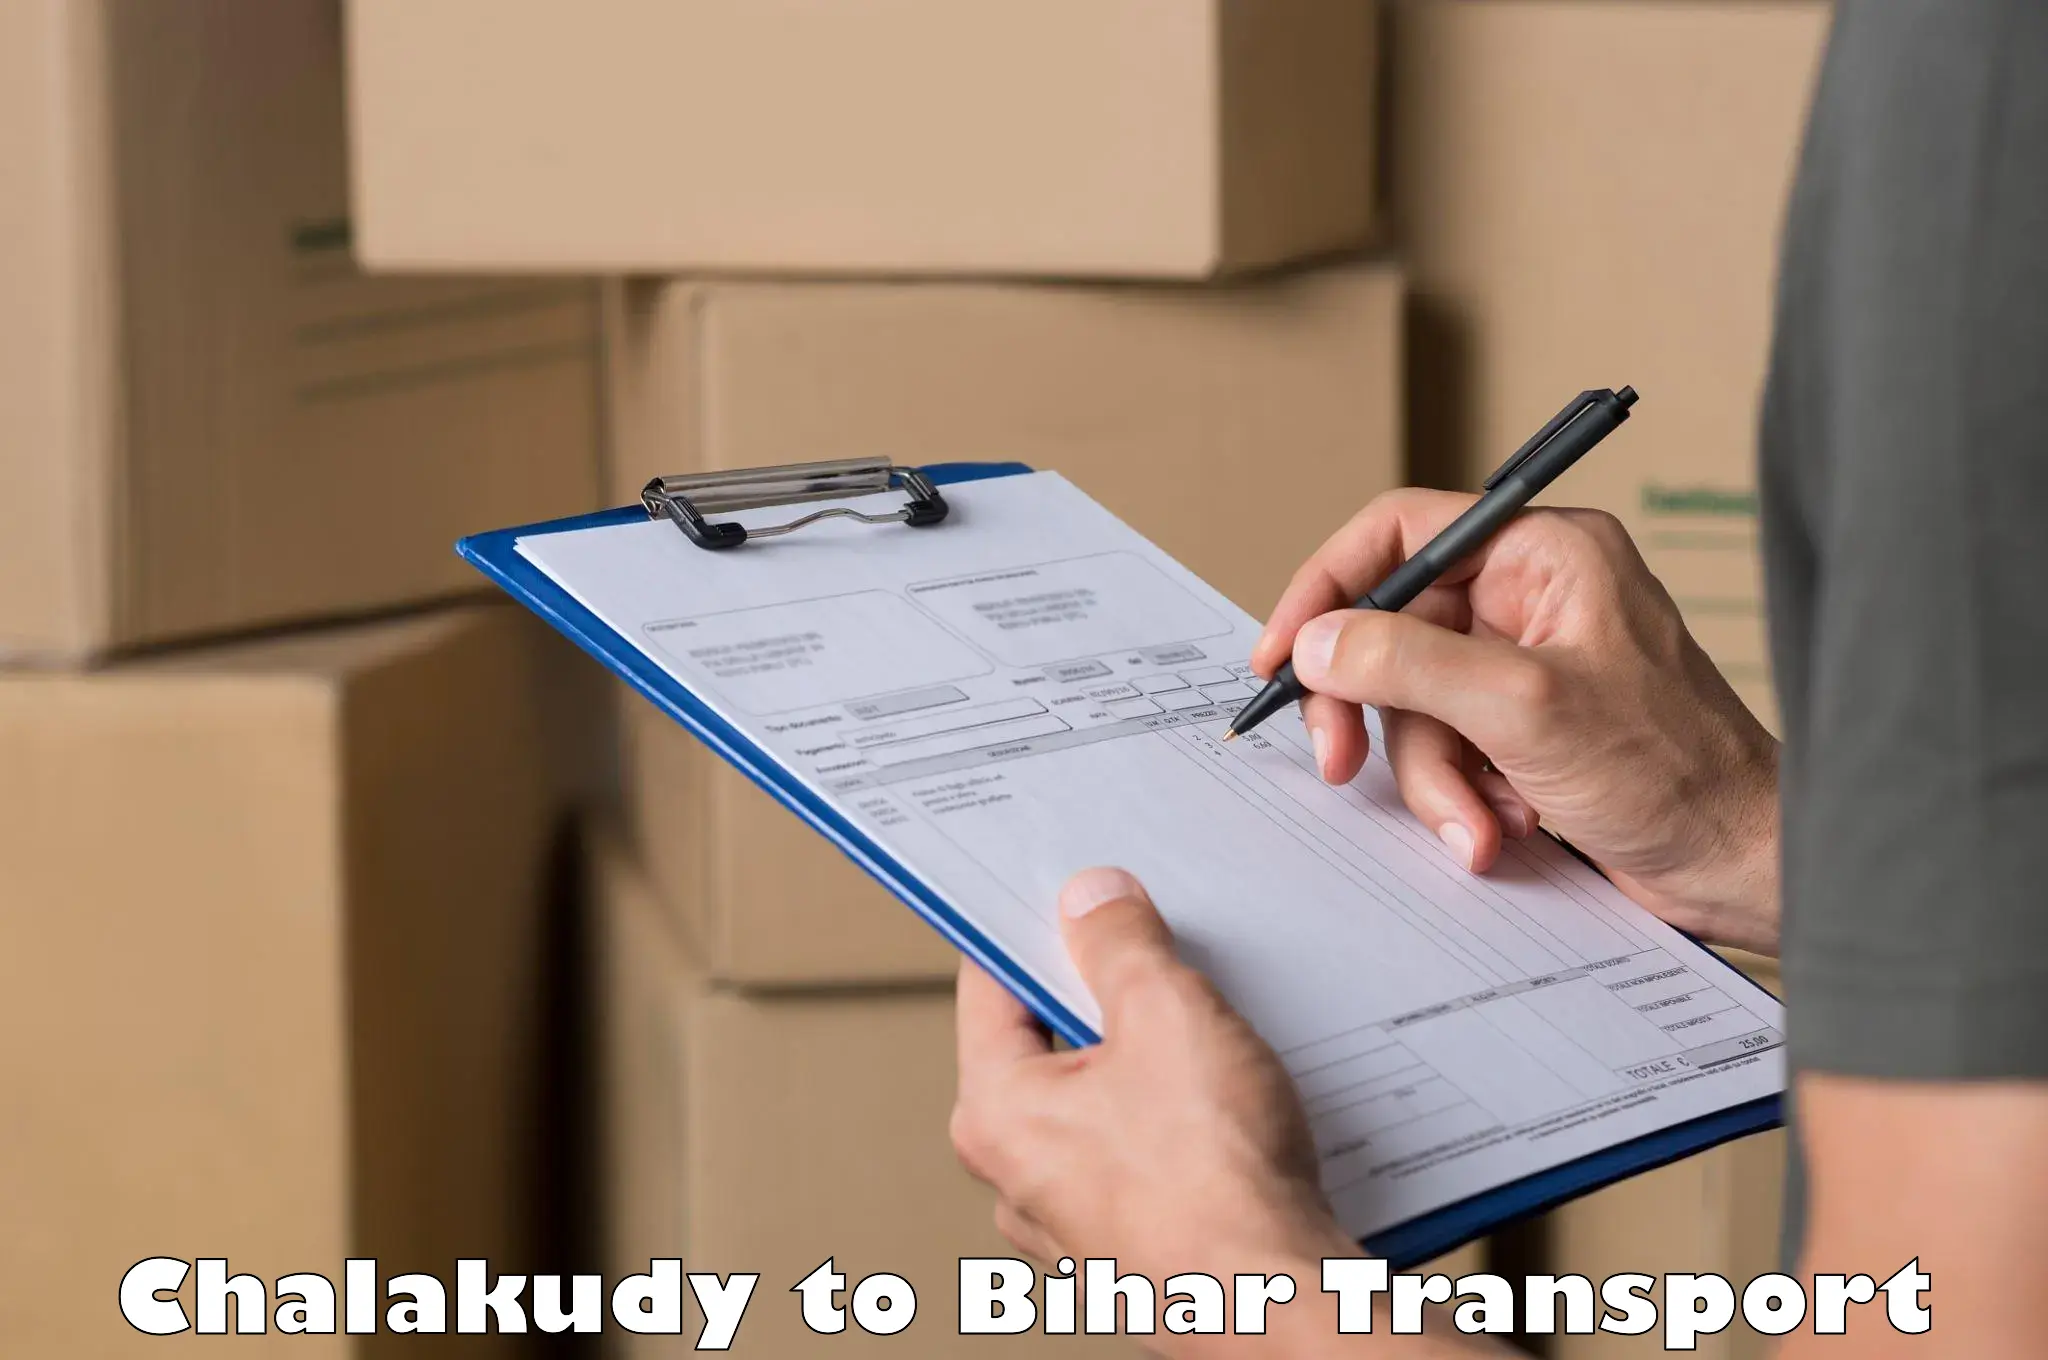 Truck transport companies in India Chalakudy to Piro